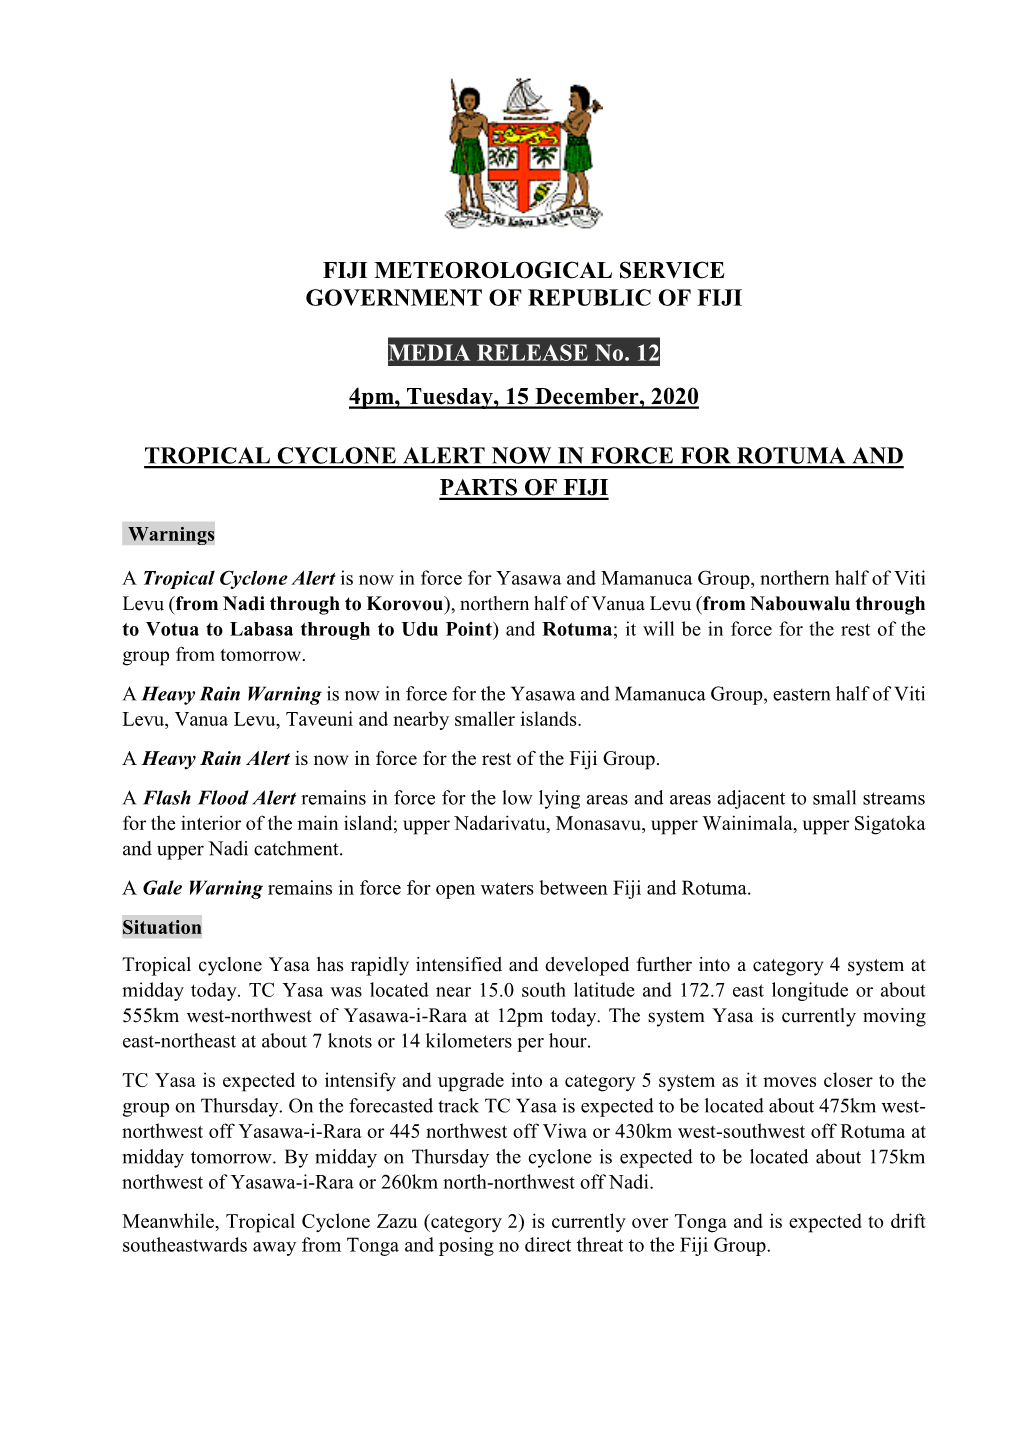 FIJI METEOROLOGICAL SERVICE GOVERNMENT of REPUBLIC of FIJI MEDIA RELEASE No. 12 4Pm, Tuesday, 15 December, 2020 TROPICAL CYCLONE